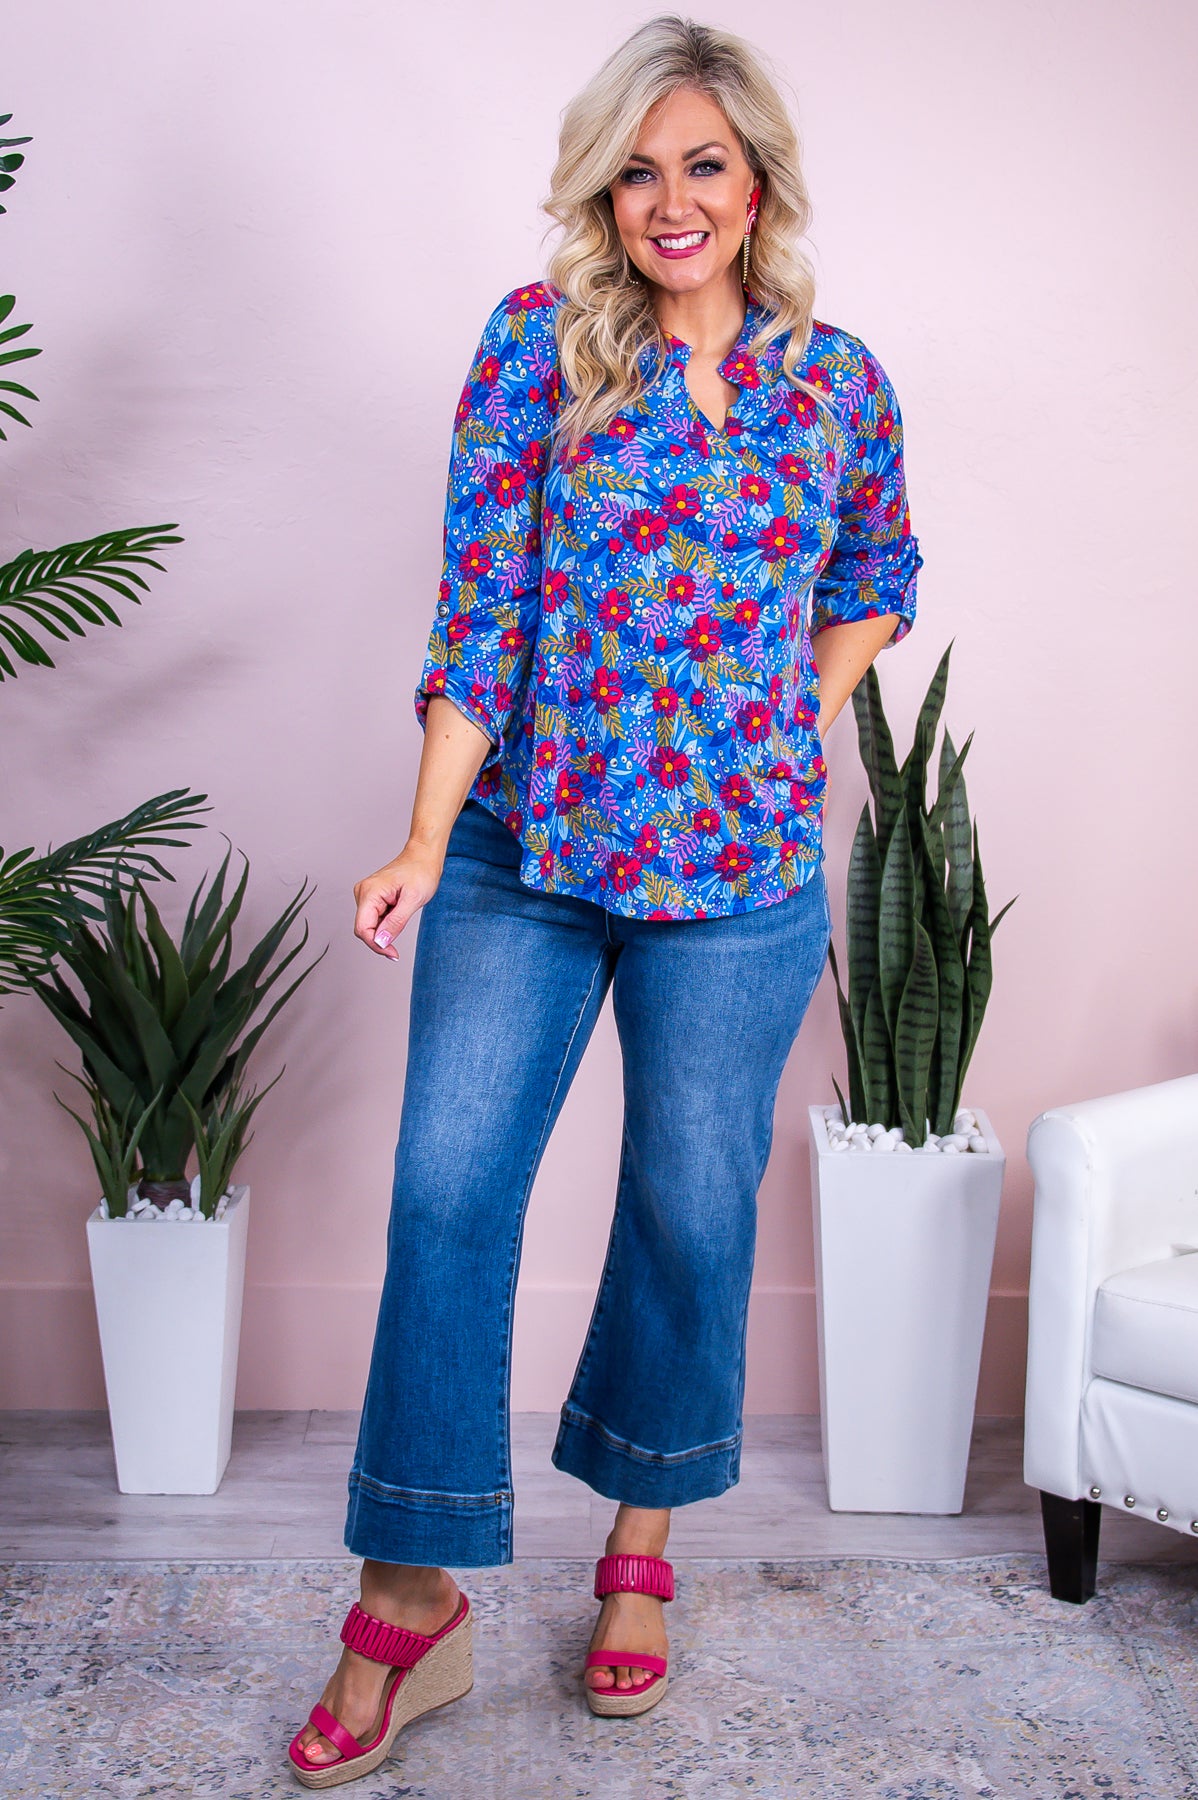 Something Pretty Royal Blue/Multi Color Floral Top - T10070RBL